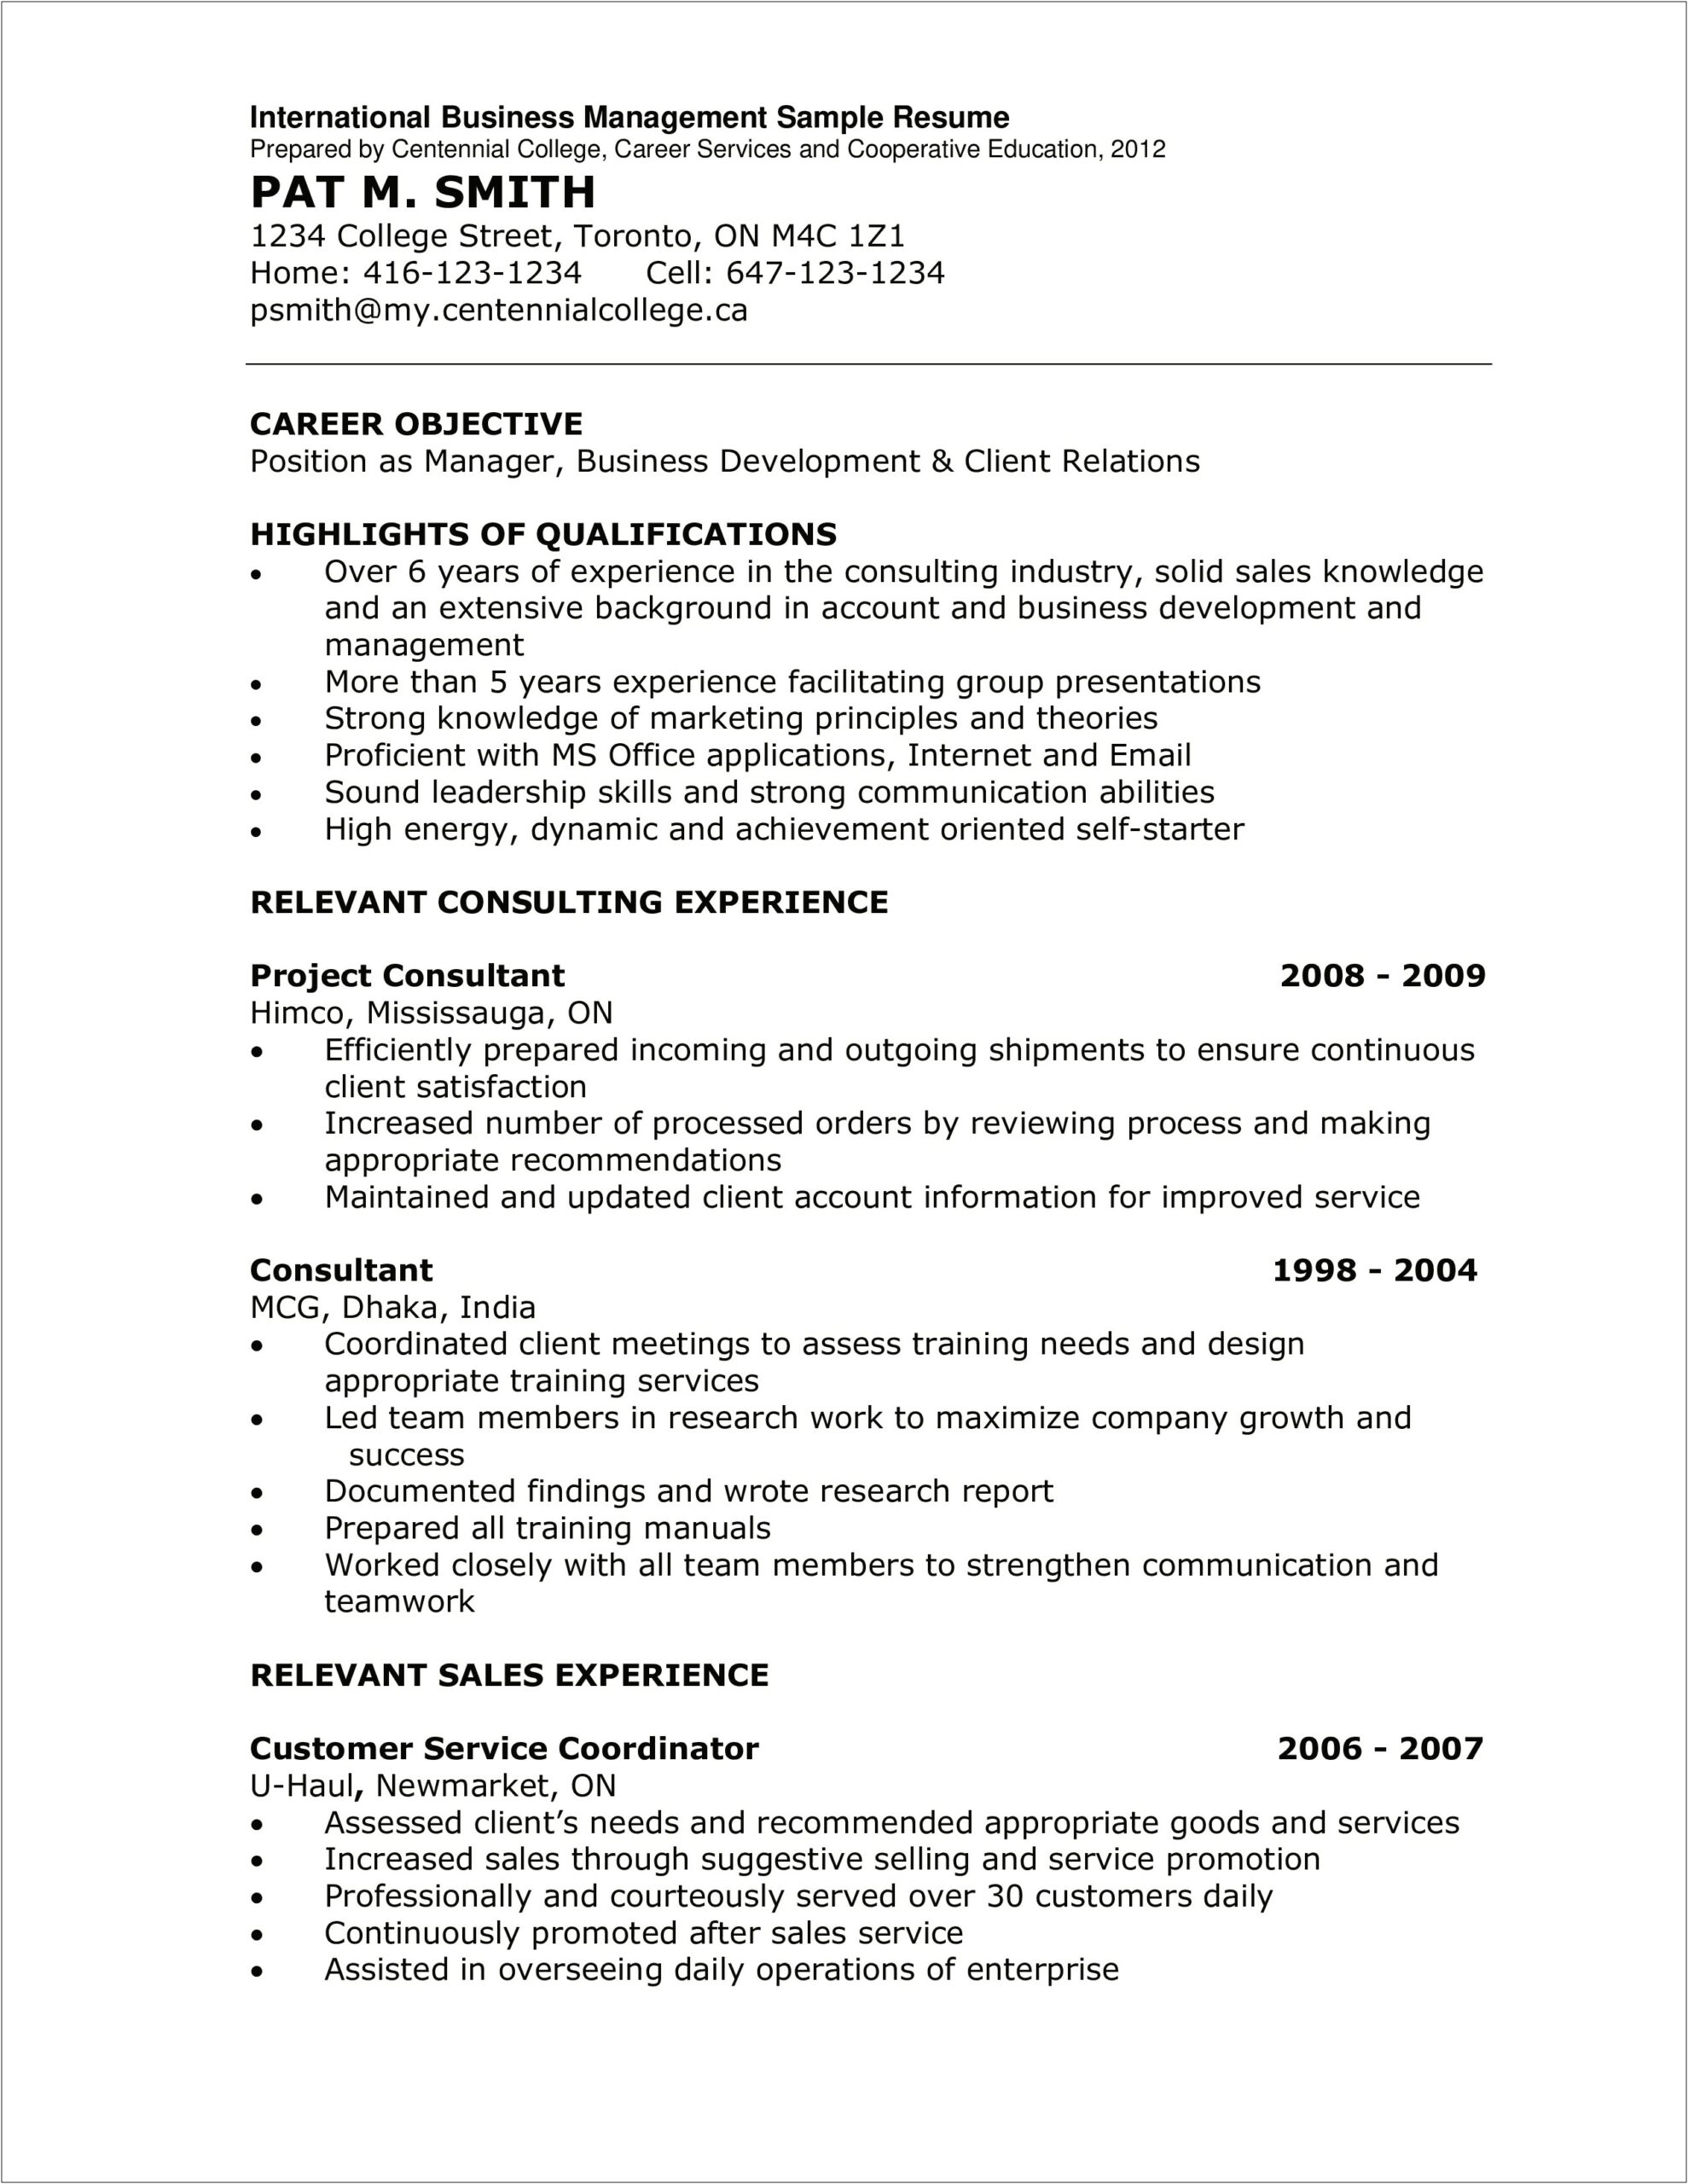 Global Experience Resume Smith College Career